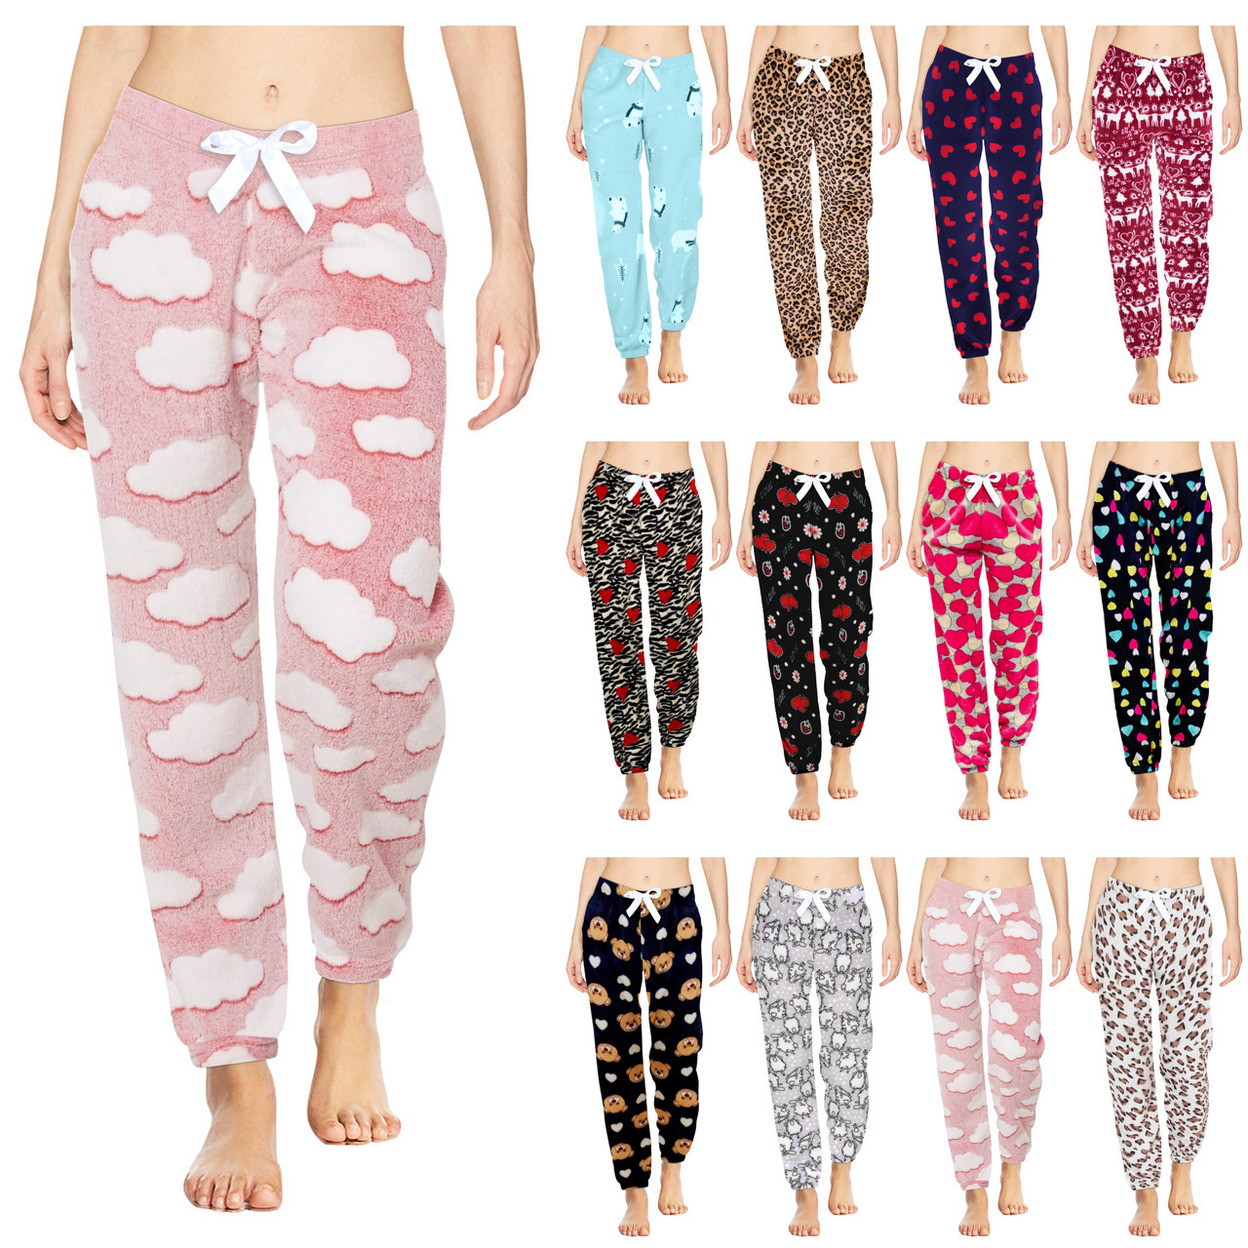 Multi-Pack: Women's Printed Ultra-Soft Comfy Stretch Micro-Fleece Pajama Lounge Pants - 3-pack, Love, Large